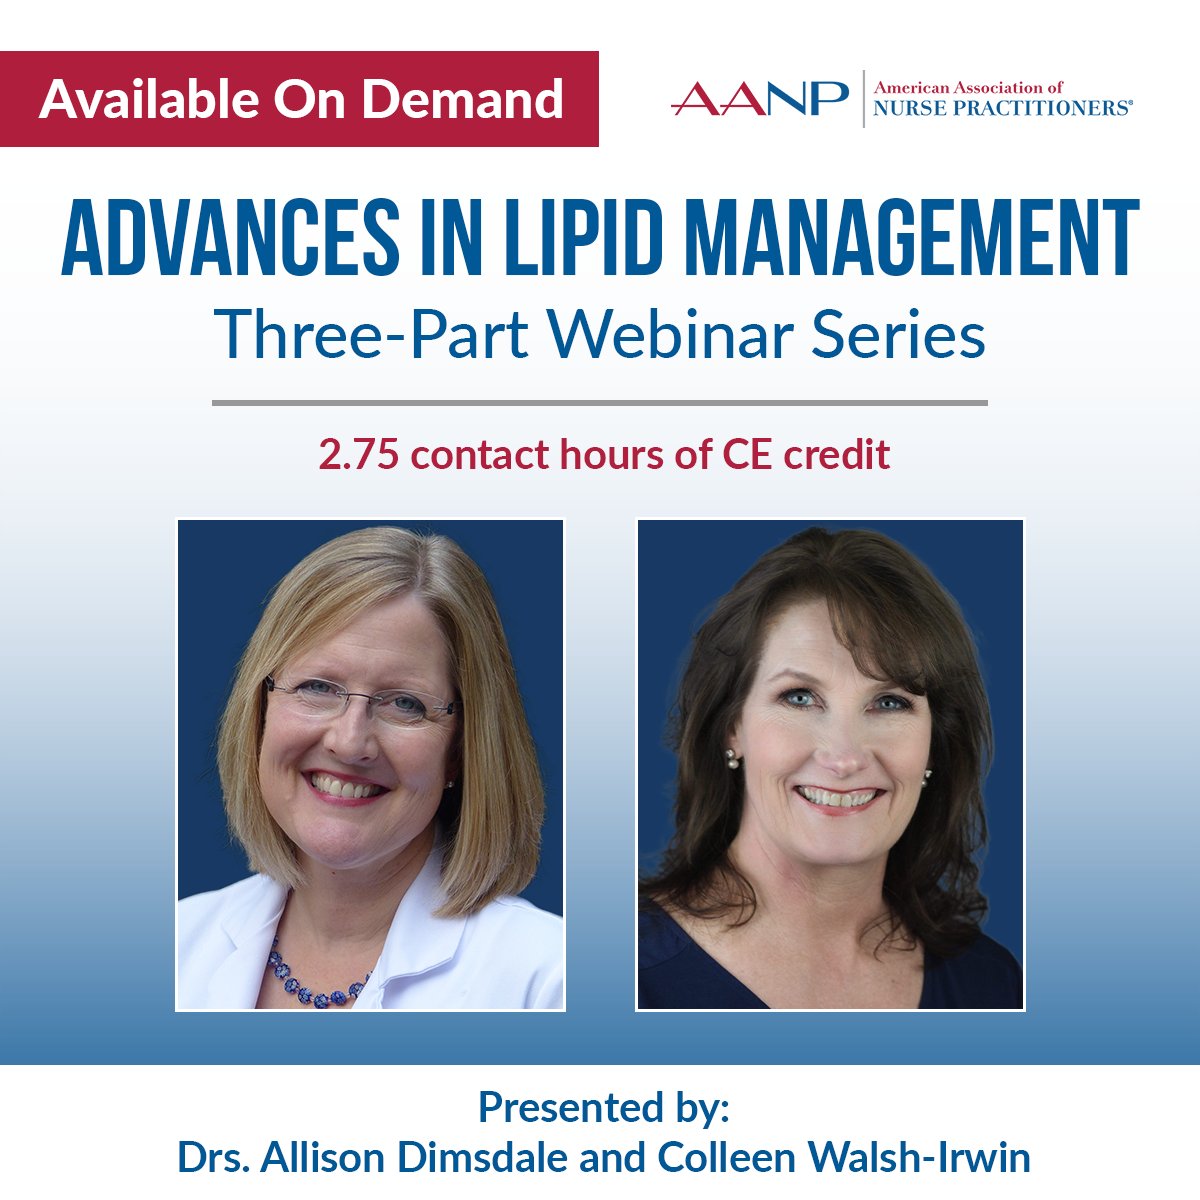 In the U.S., cardiovascular disease remains the leading cause of mortality. Dyslipidemia is a leading risk factor for cardiovascular disease. Complete the three-part webinar series to earn 2.75 CH of CE credit. bit.ly/aanp-lipid #NPsLead